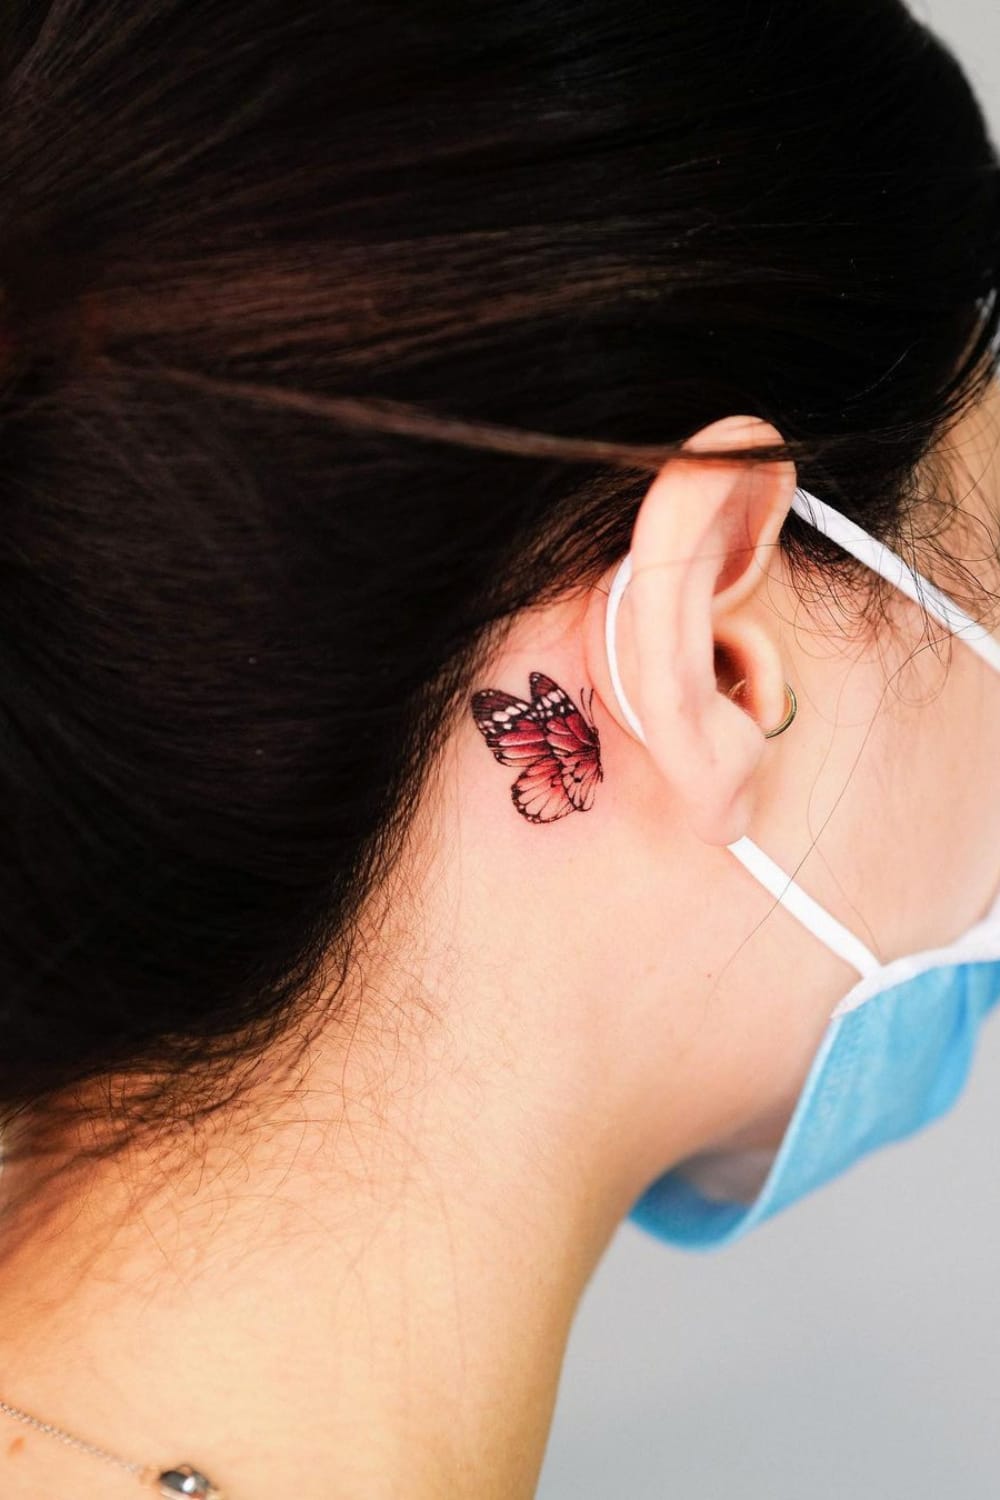 Red Butterfly Tattoo Behind the Ear